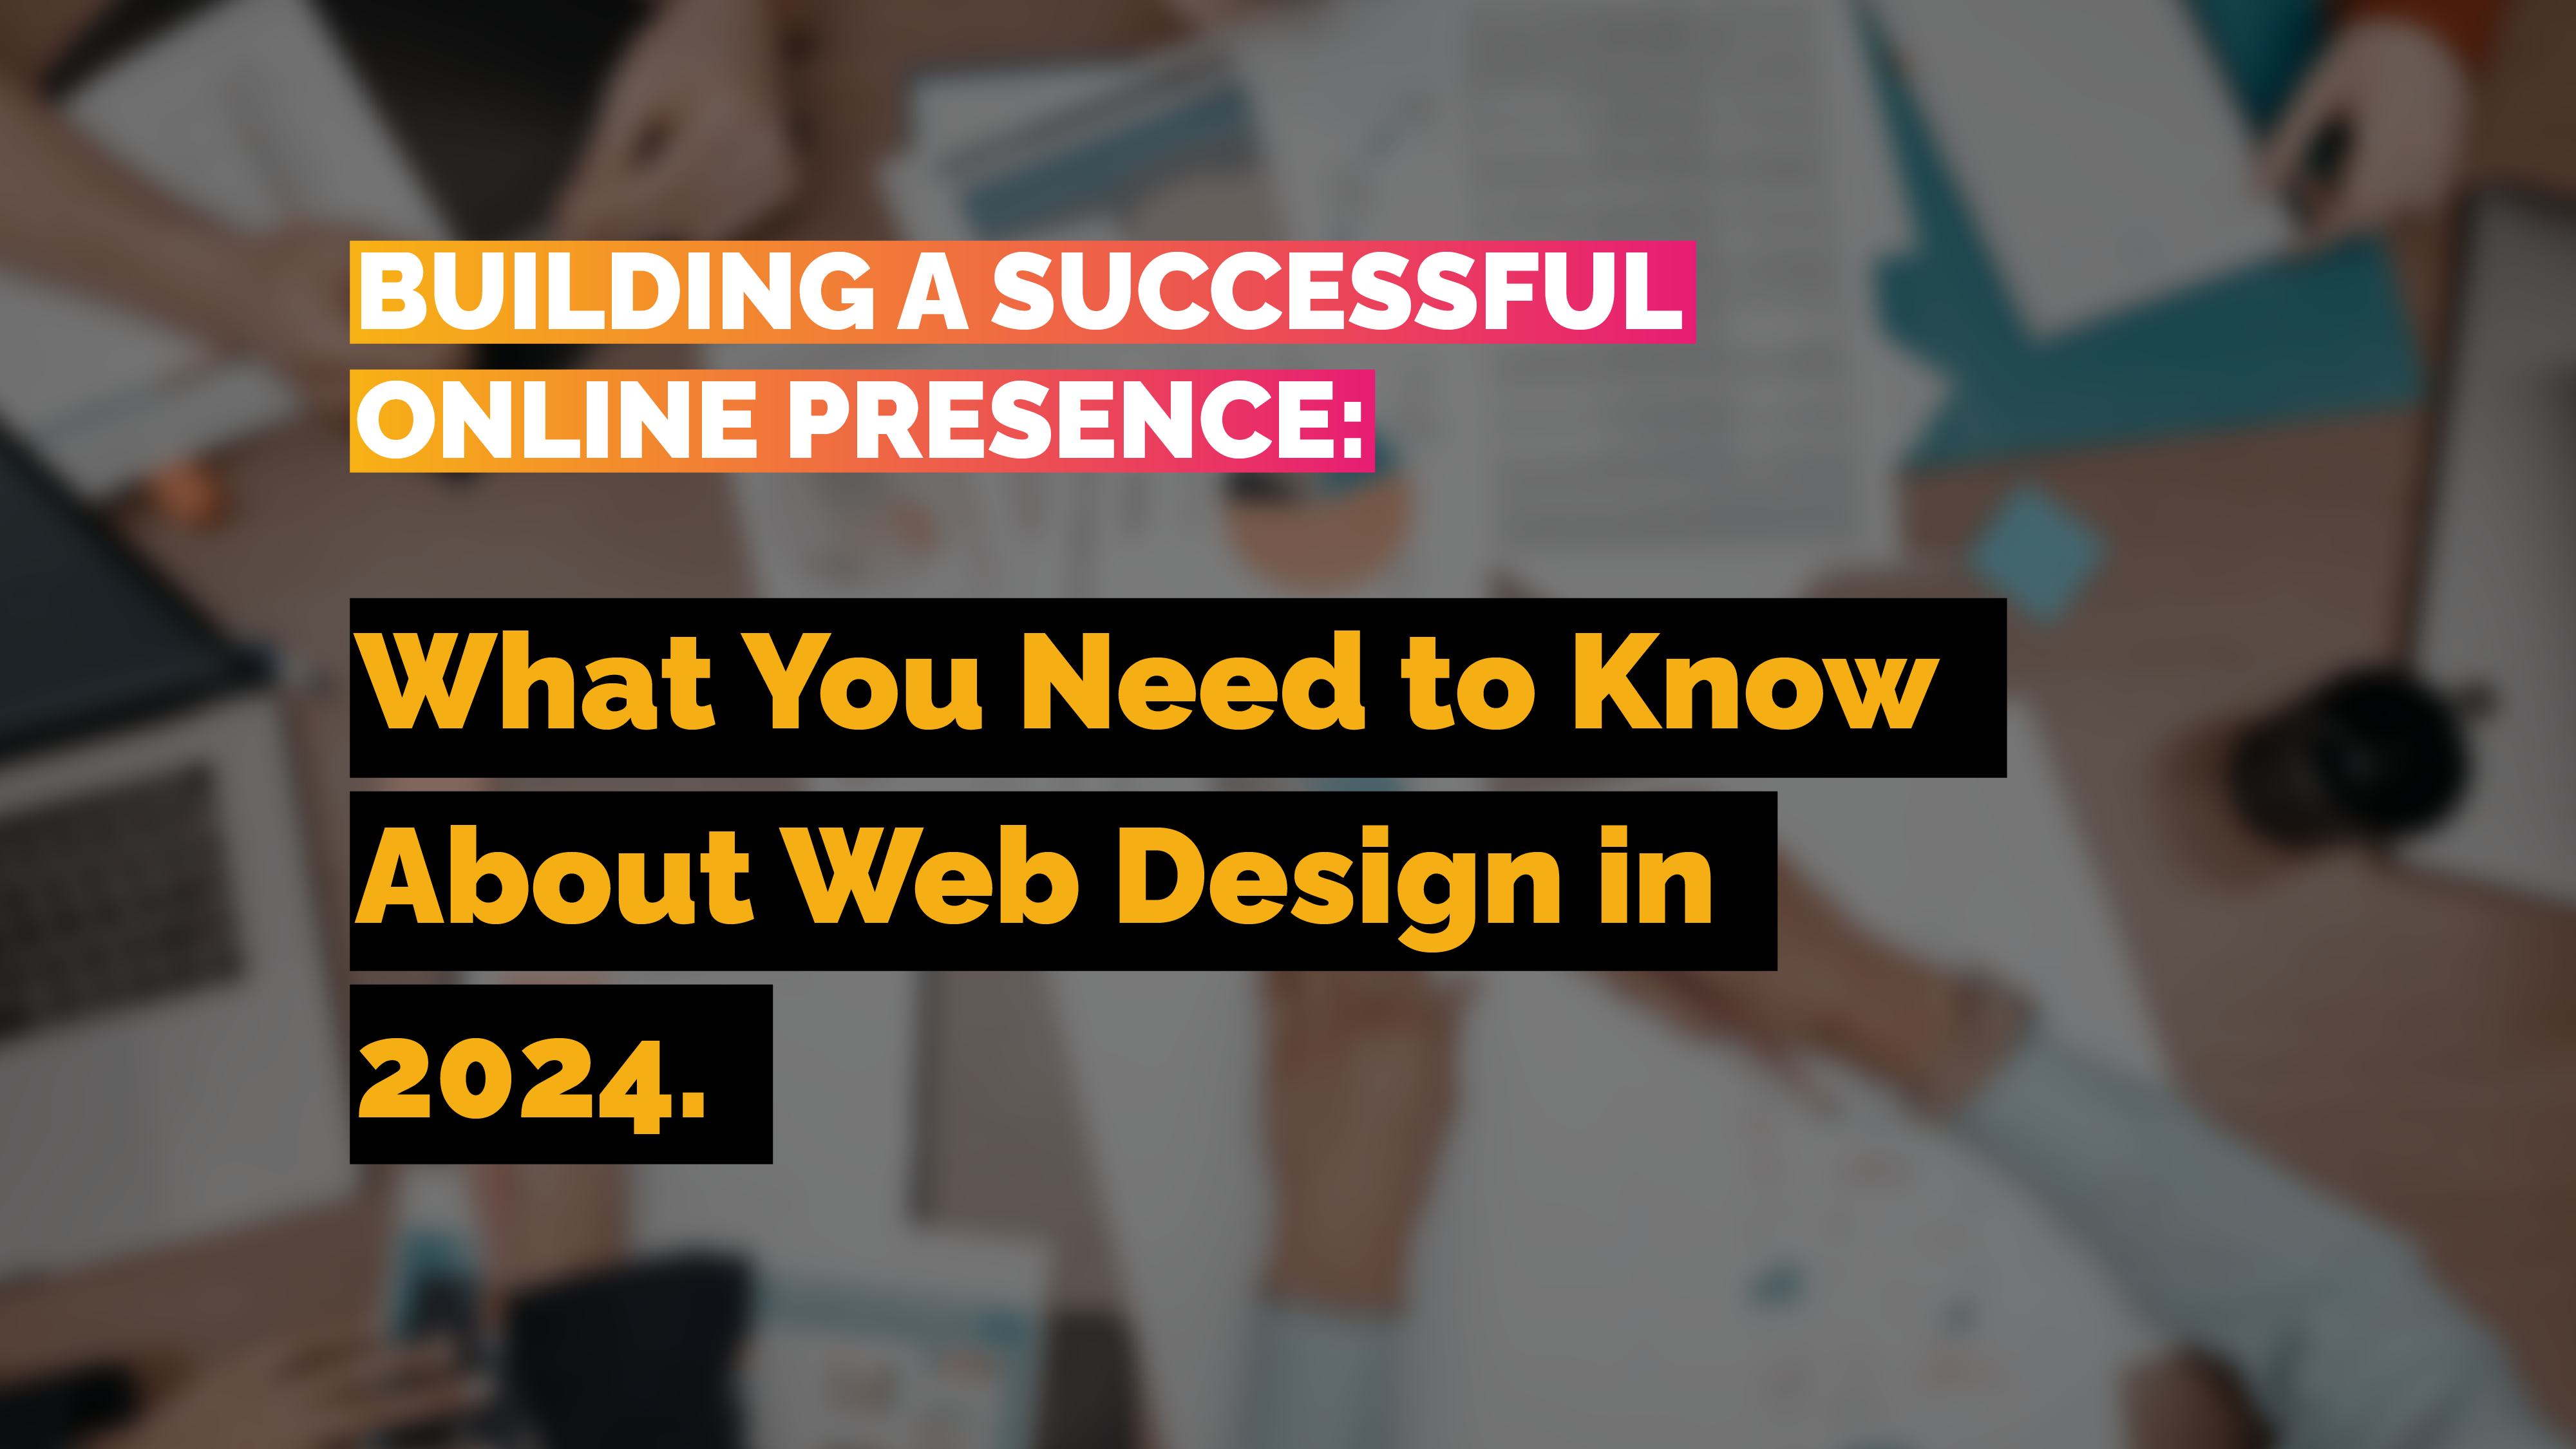 Building a Successful Online Presence: What You Need to Know About Web Design in 2023